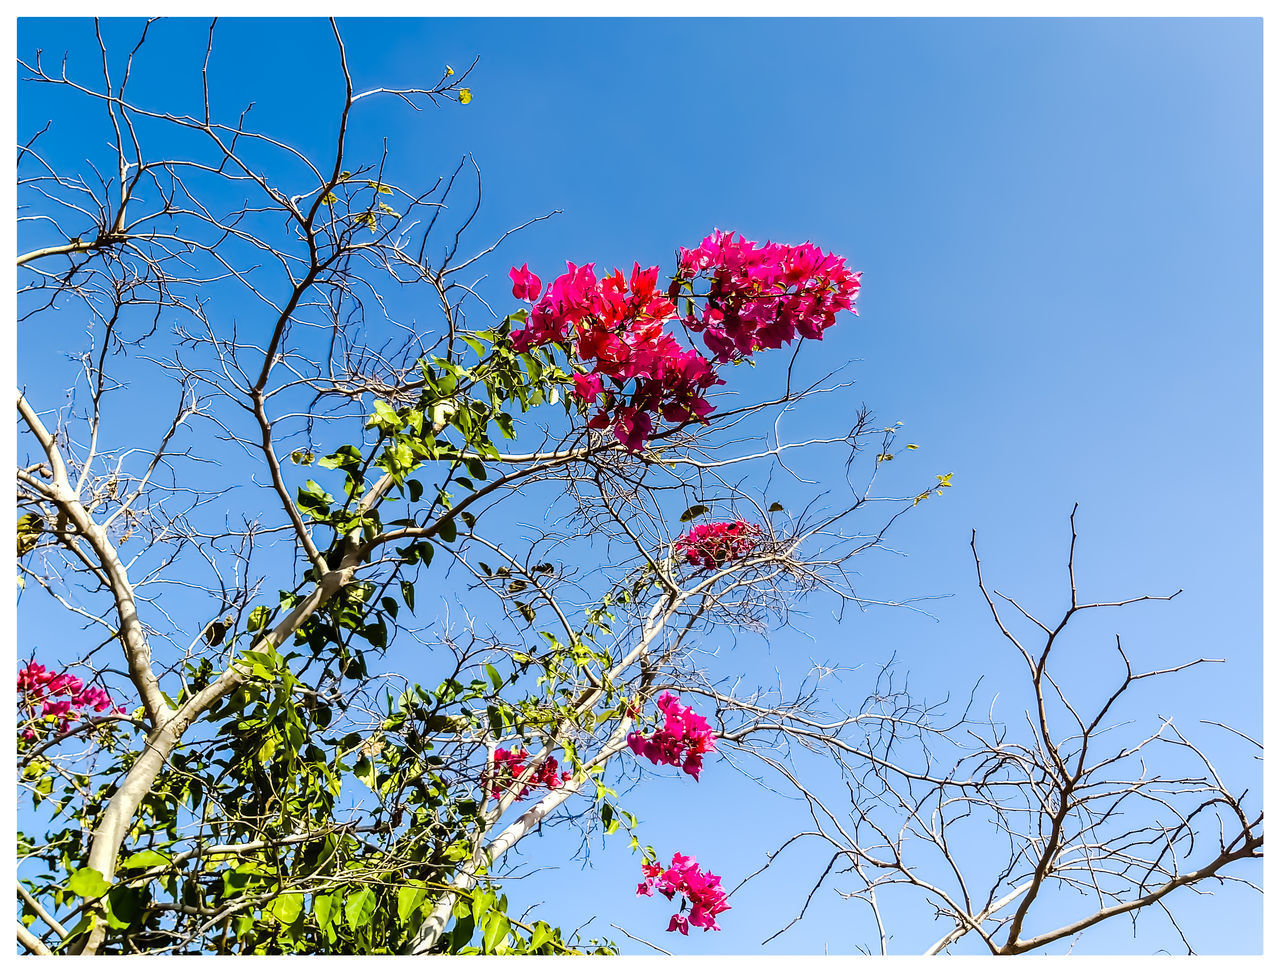 LOW ANGLE VIEW OF PINK FLOWERING PLANT AGAINST CLEAR BLUE SKY